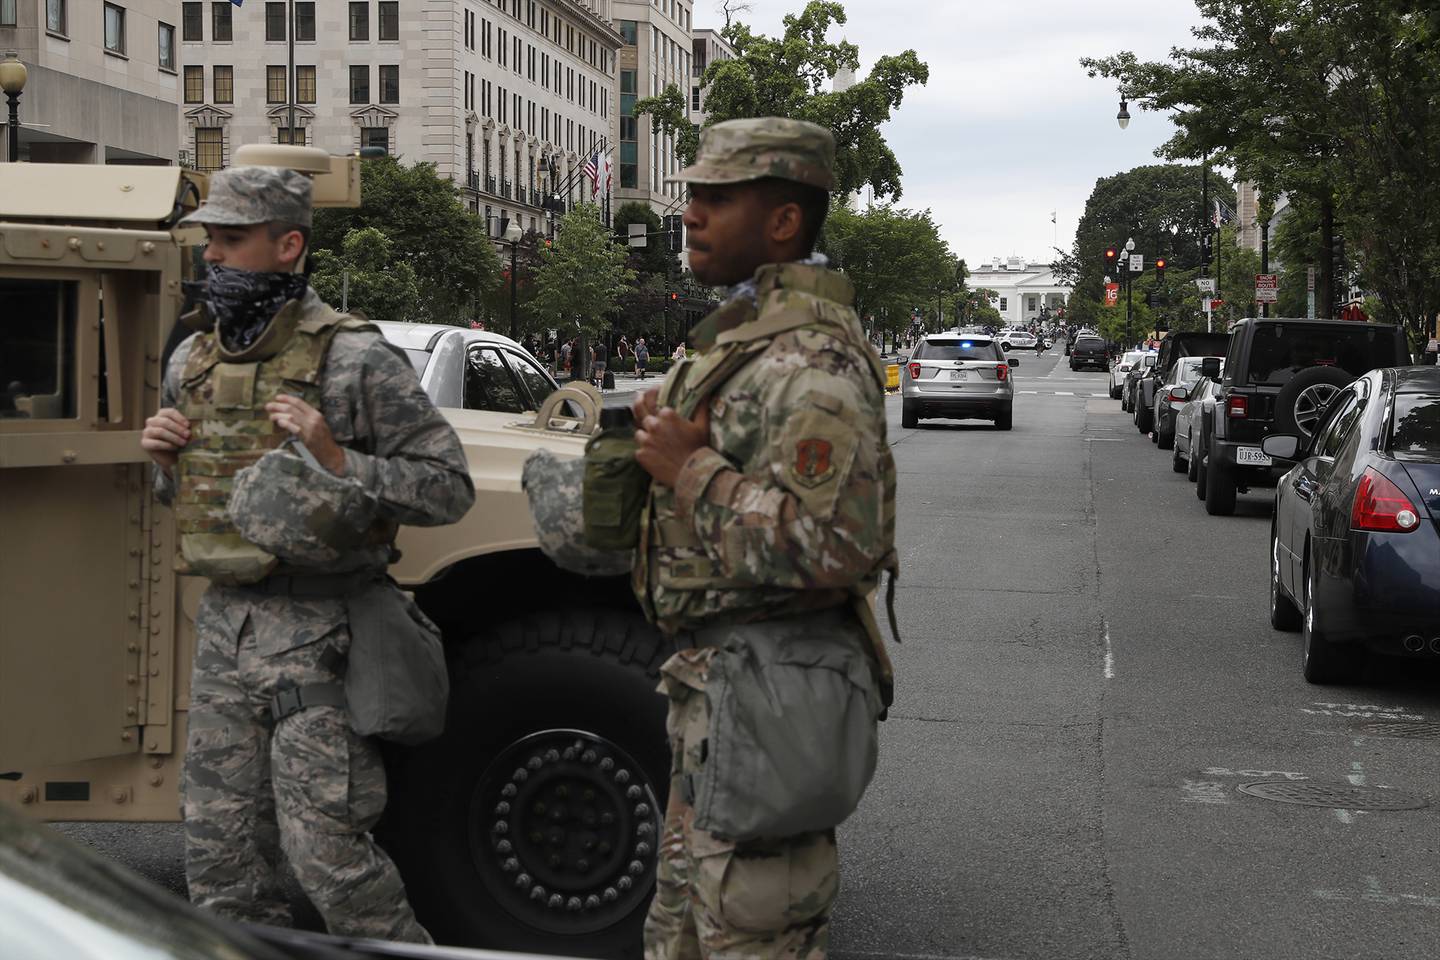 Members of the D.C. National Guard block an intersection on 16th Street as demonstrators gather to protest the death of George Floyd, Tuesday, June 2, 2020, near the White House in Washington.